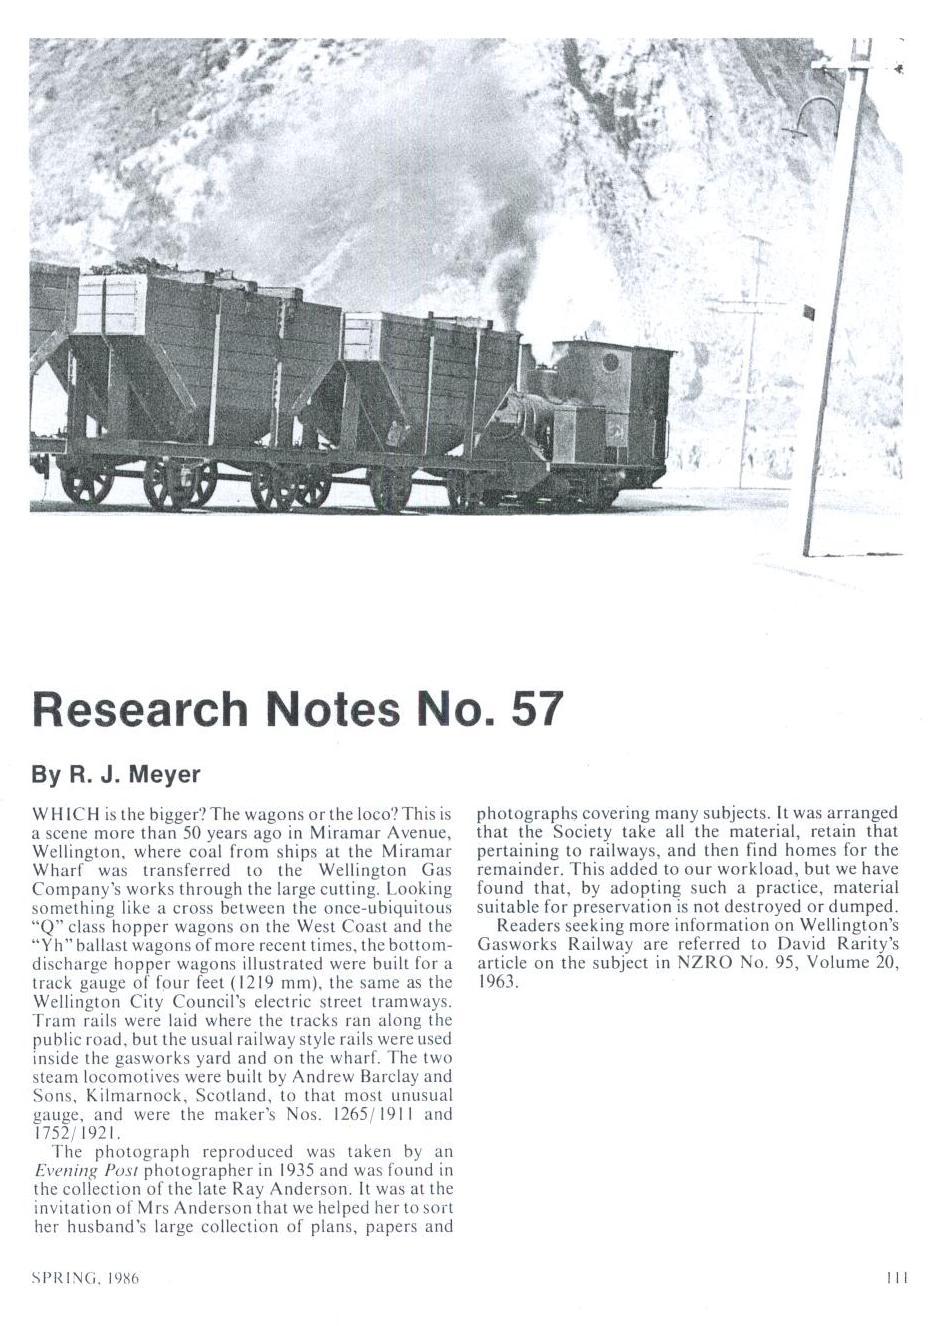 NZ Railway Observer Spring 1986 pg 111 Research Notes No. 57 By R. J. Meyer